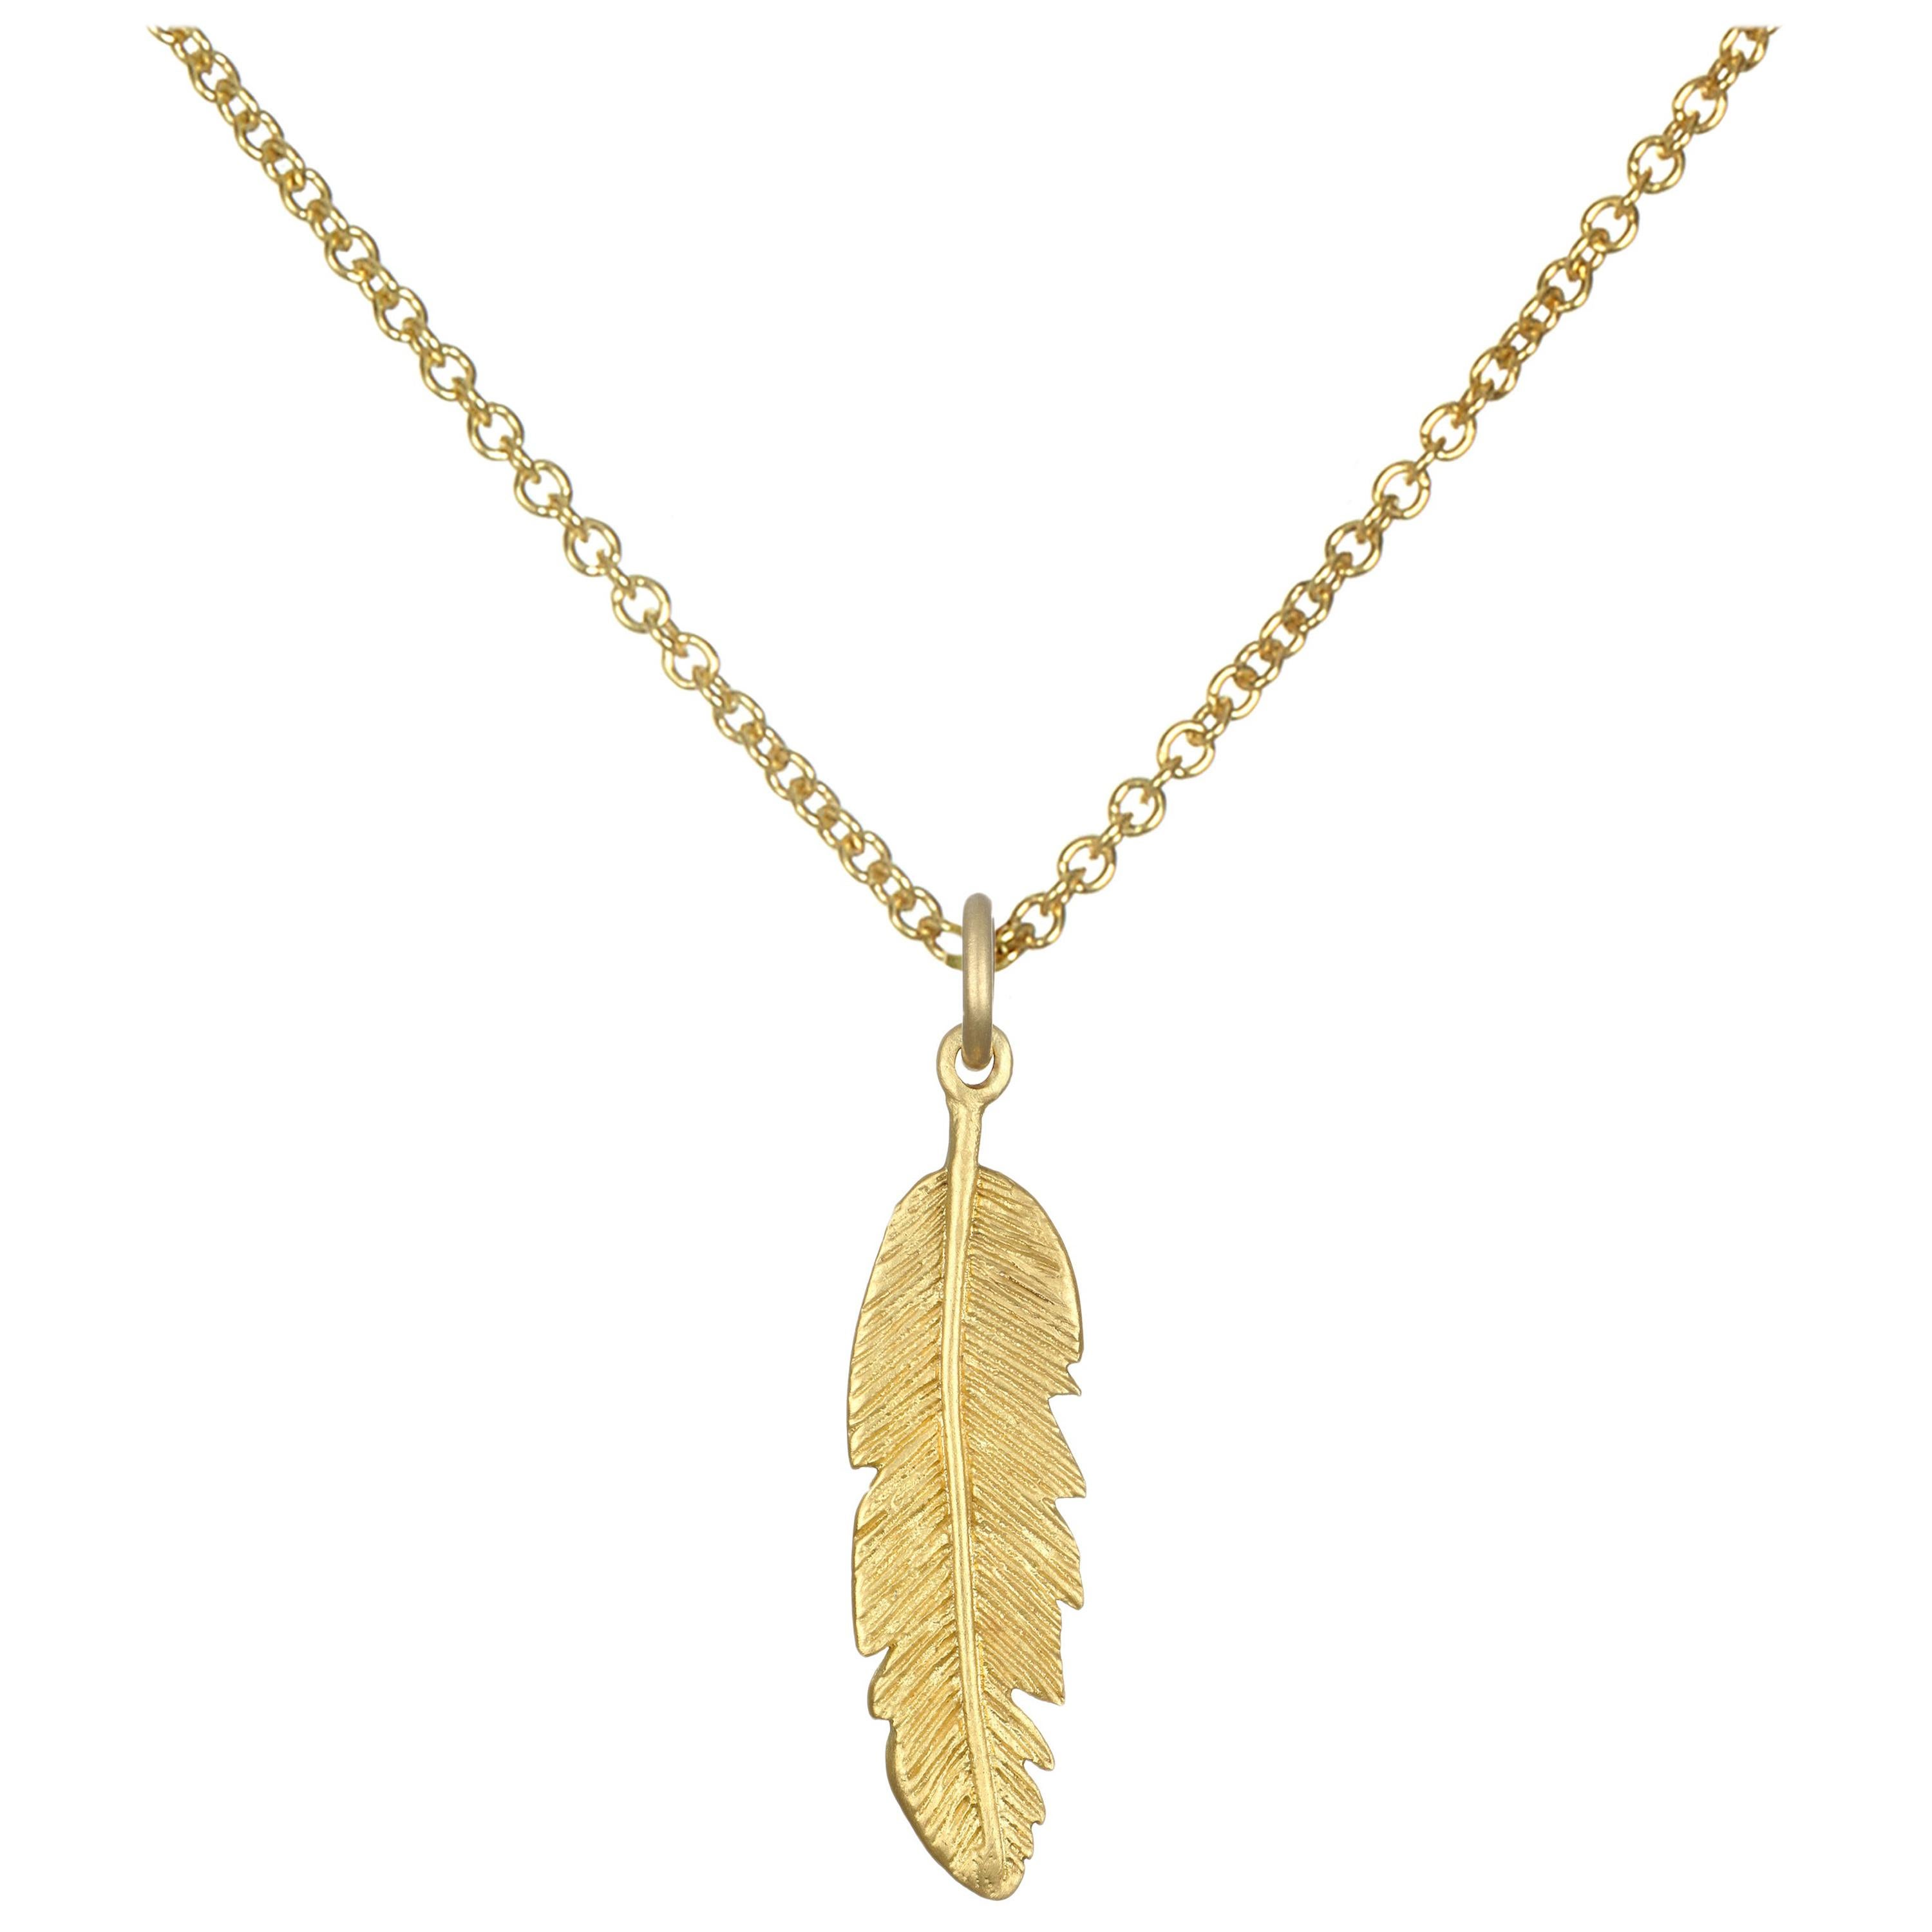 Faye Kim 18k Gold Feather Charm Necklace For Sale